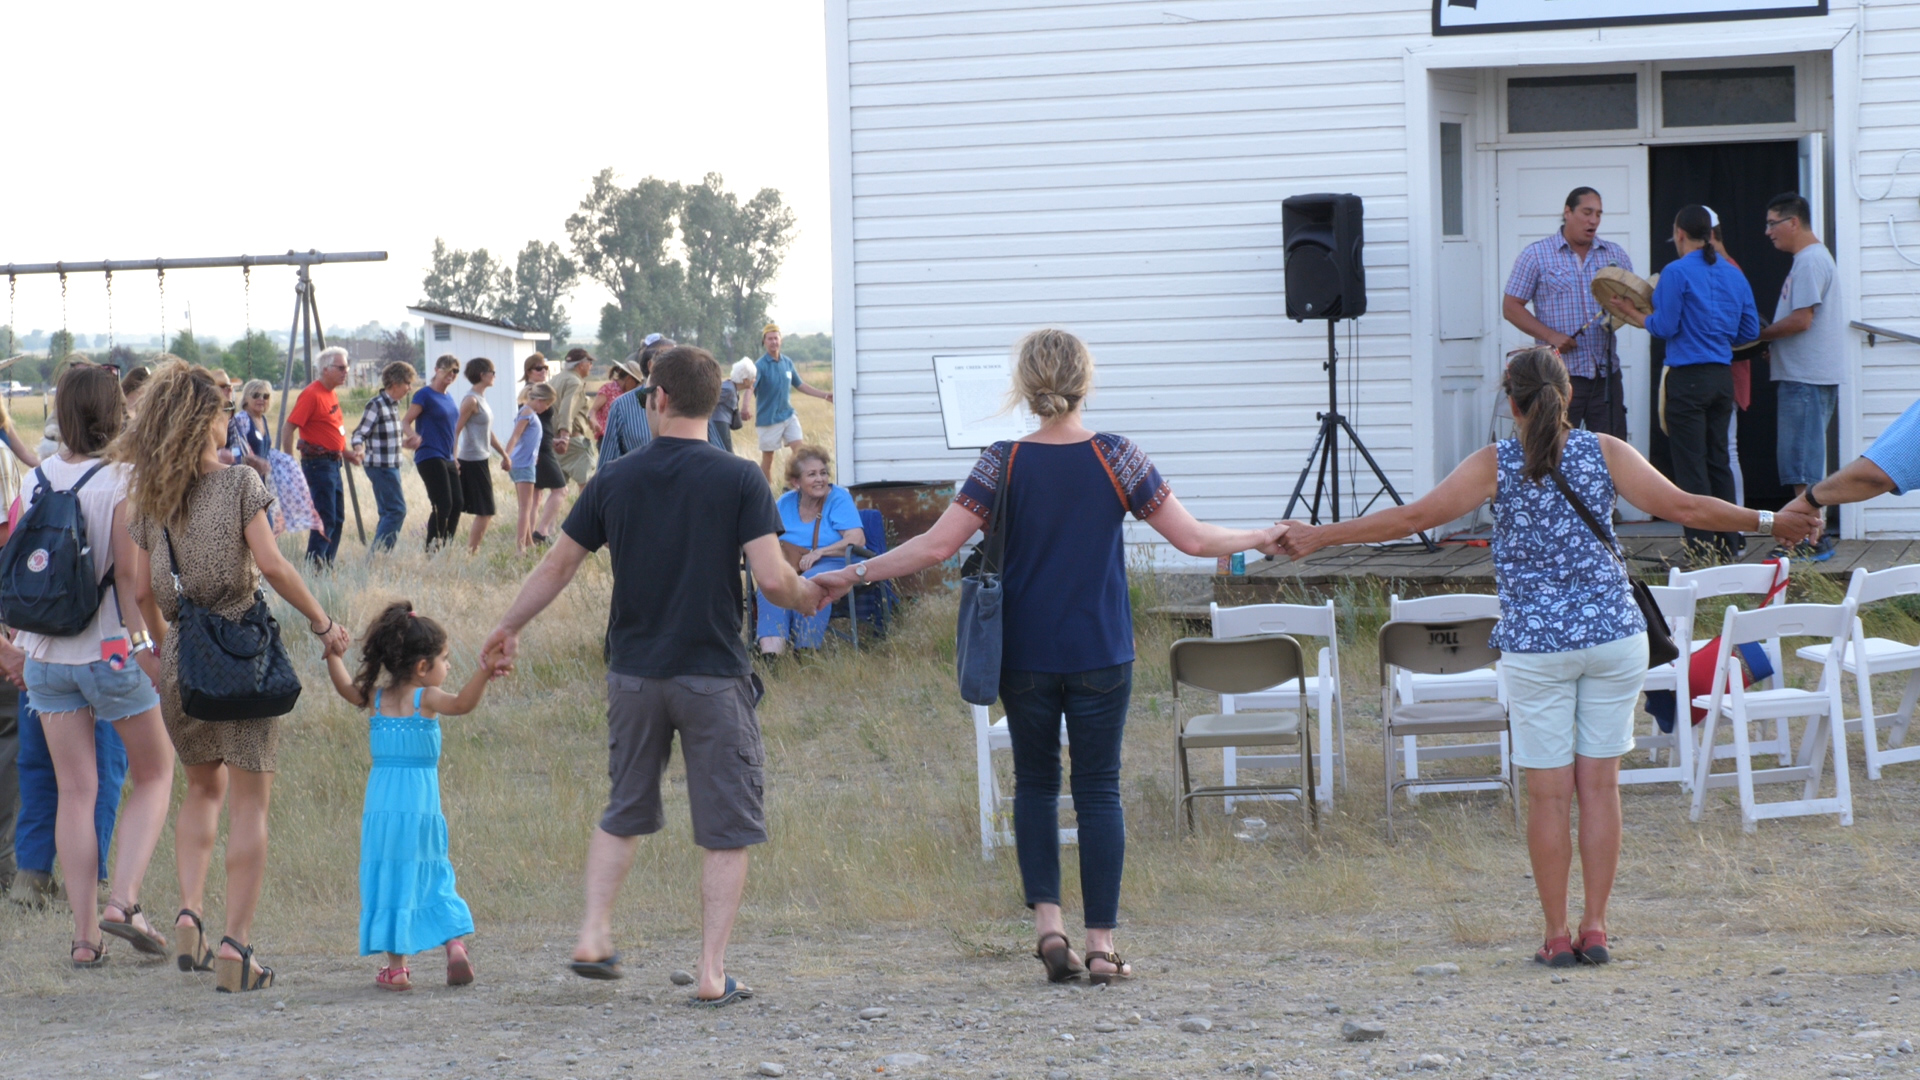  Guests joined hands and did a Native American round dance during the opening of the installation. 